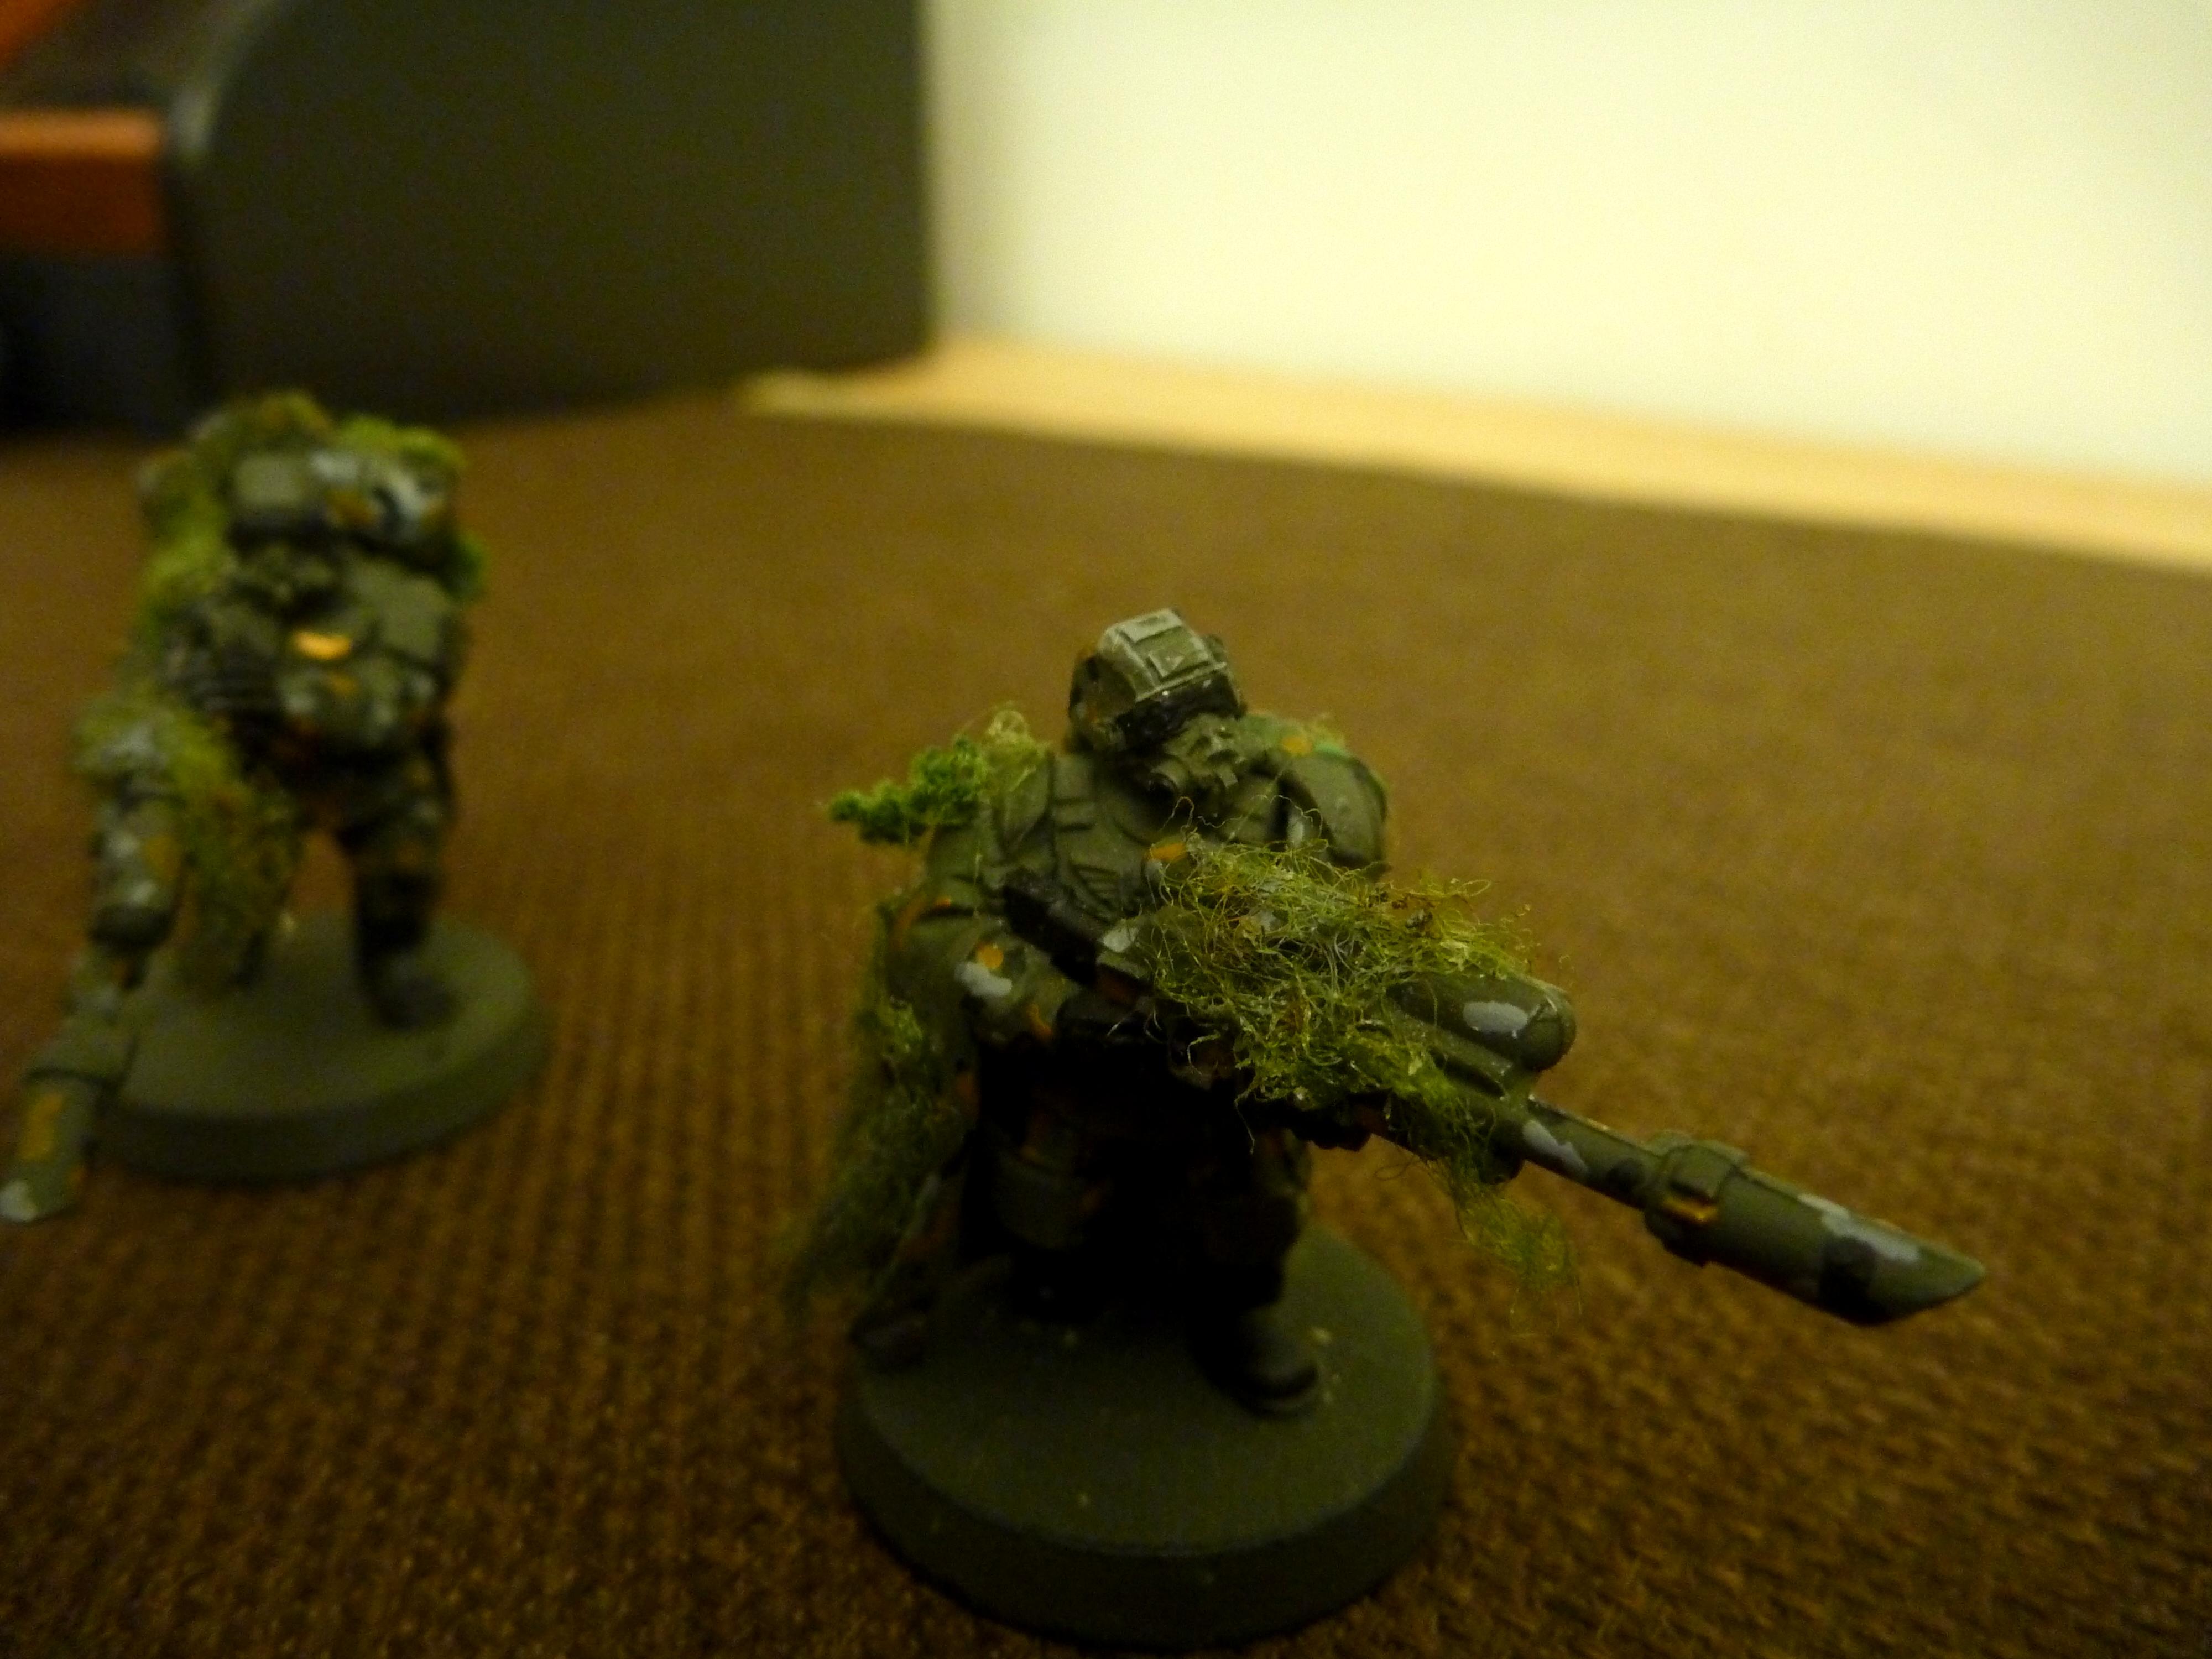 Imperial Guard, Snipers